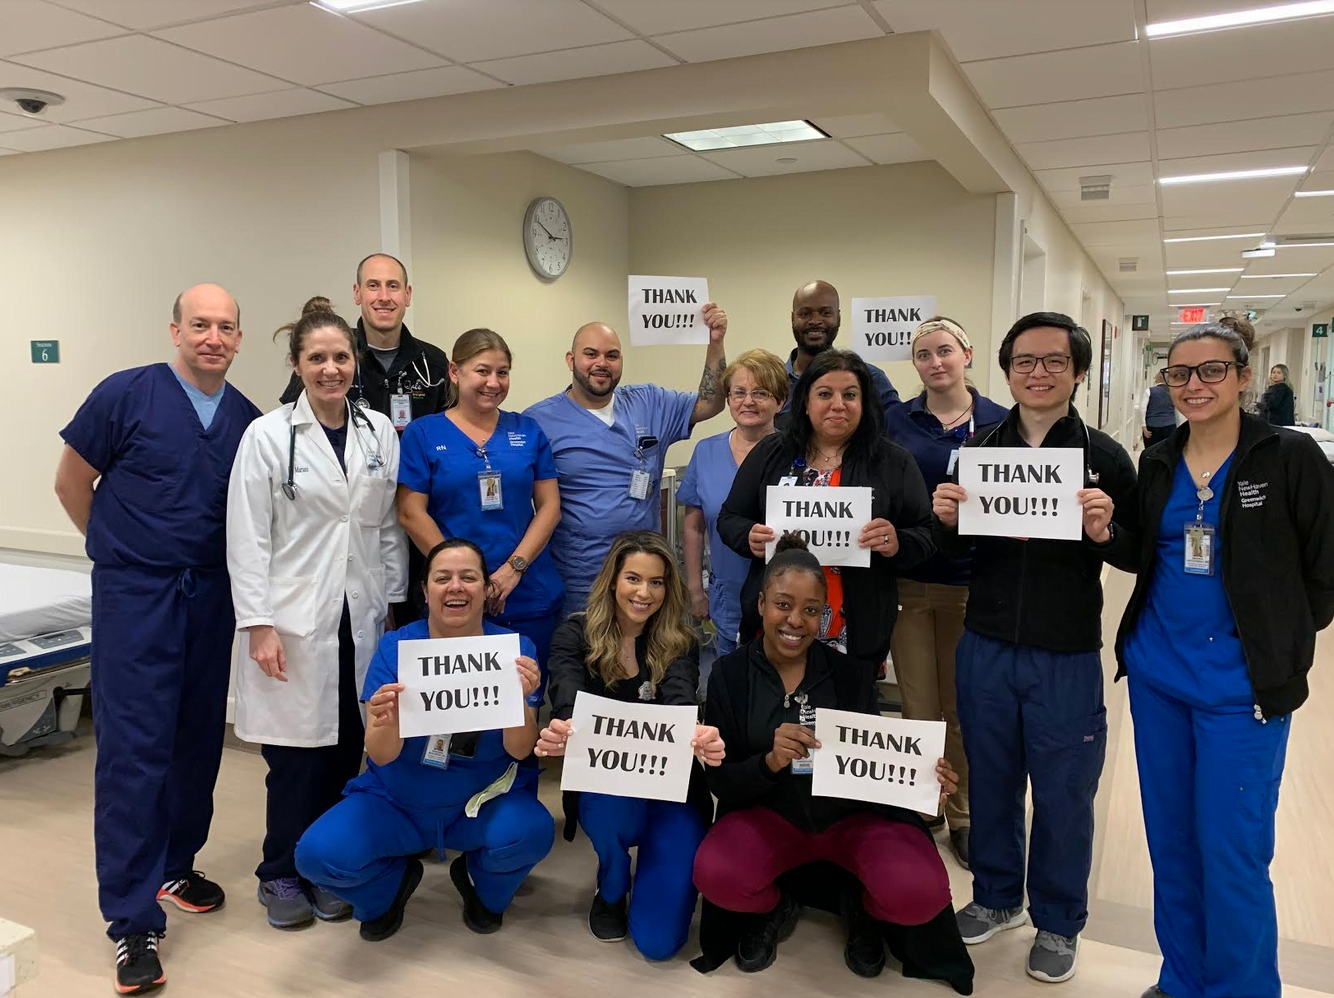 Greenwich Hospital Emergency Department staff expressed their gratitude for the acts of kindness from the community they serve. 